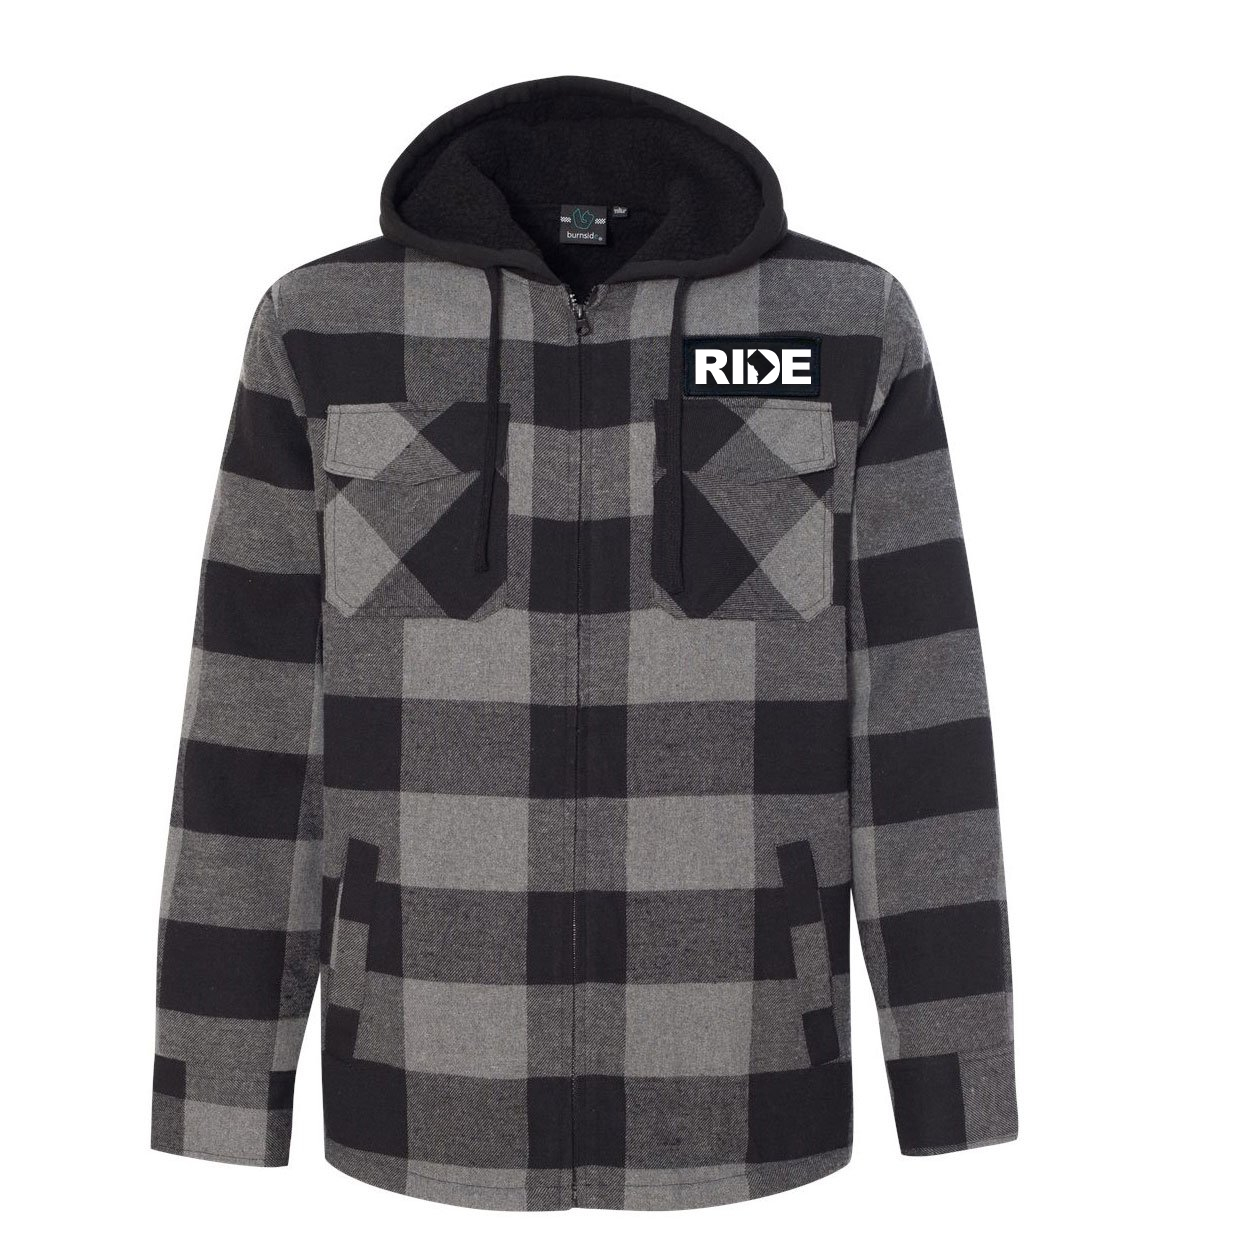 Ride District of Columbia Classic Unisex Full Zip Woven Patch Hooded Flannel Jacket Black/Gray (White Logo)